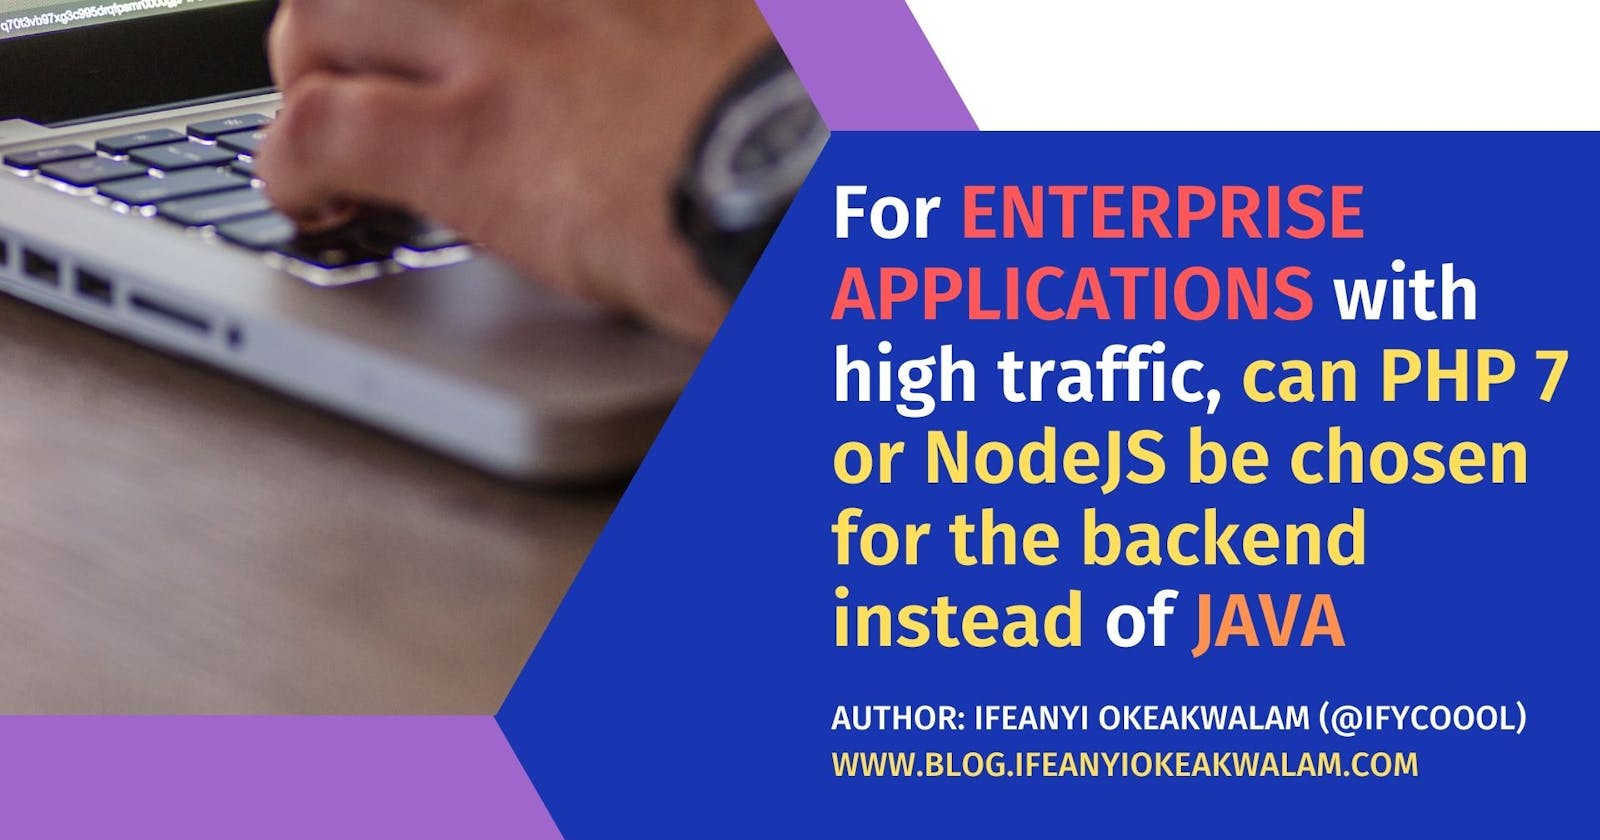 For enterprise application with high traffic, can PHP 7 or NodeJS be chosen for the backend instead of Java